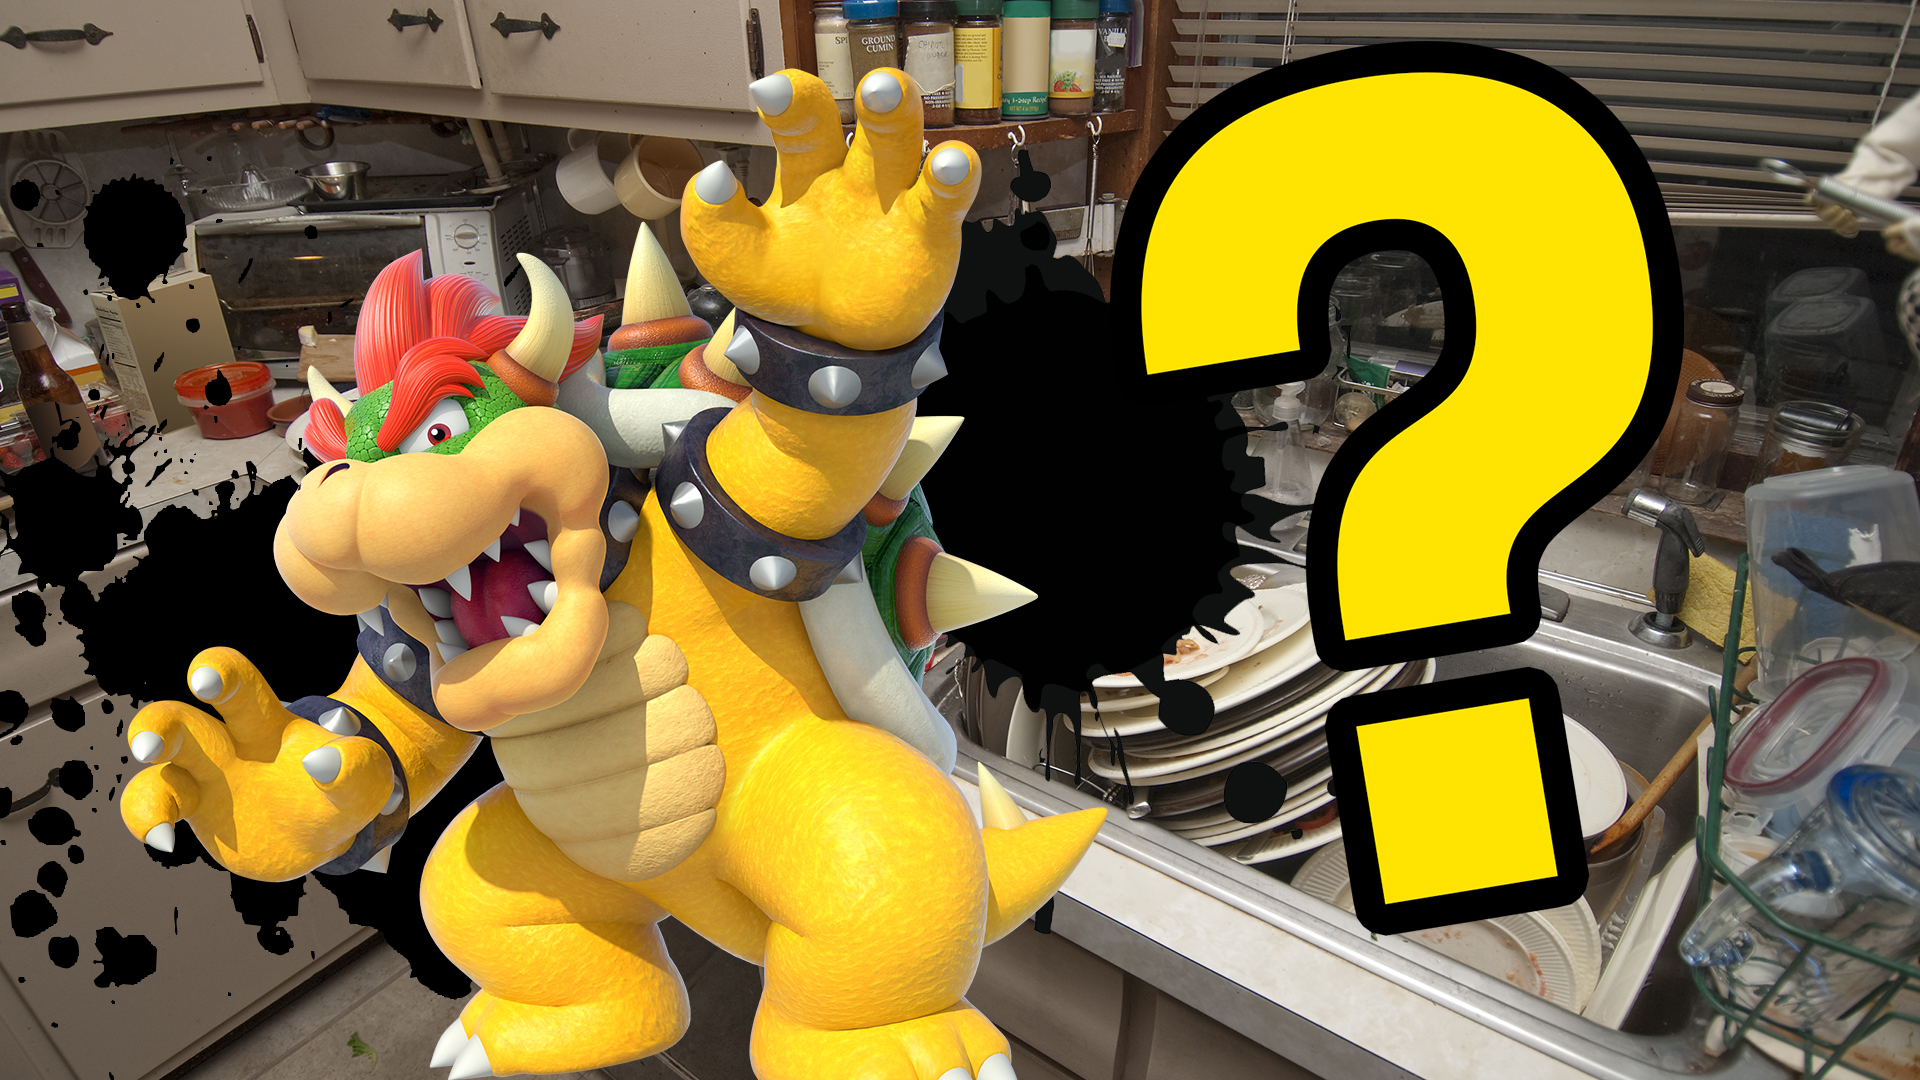 Bowser is in a dirty kitchen